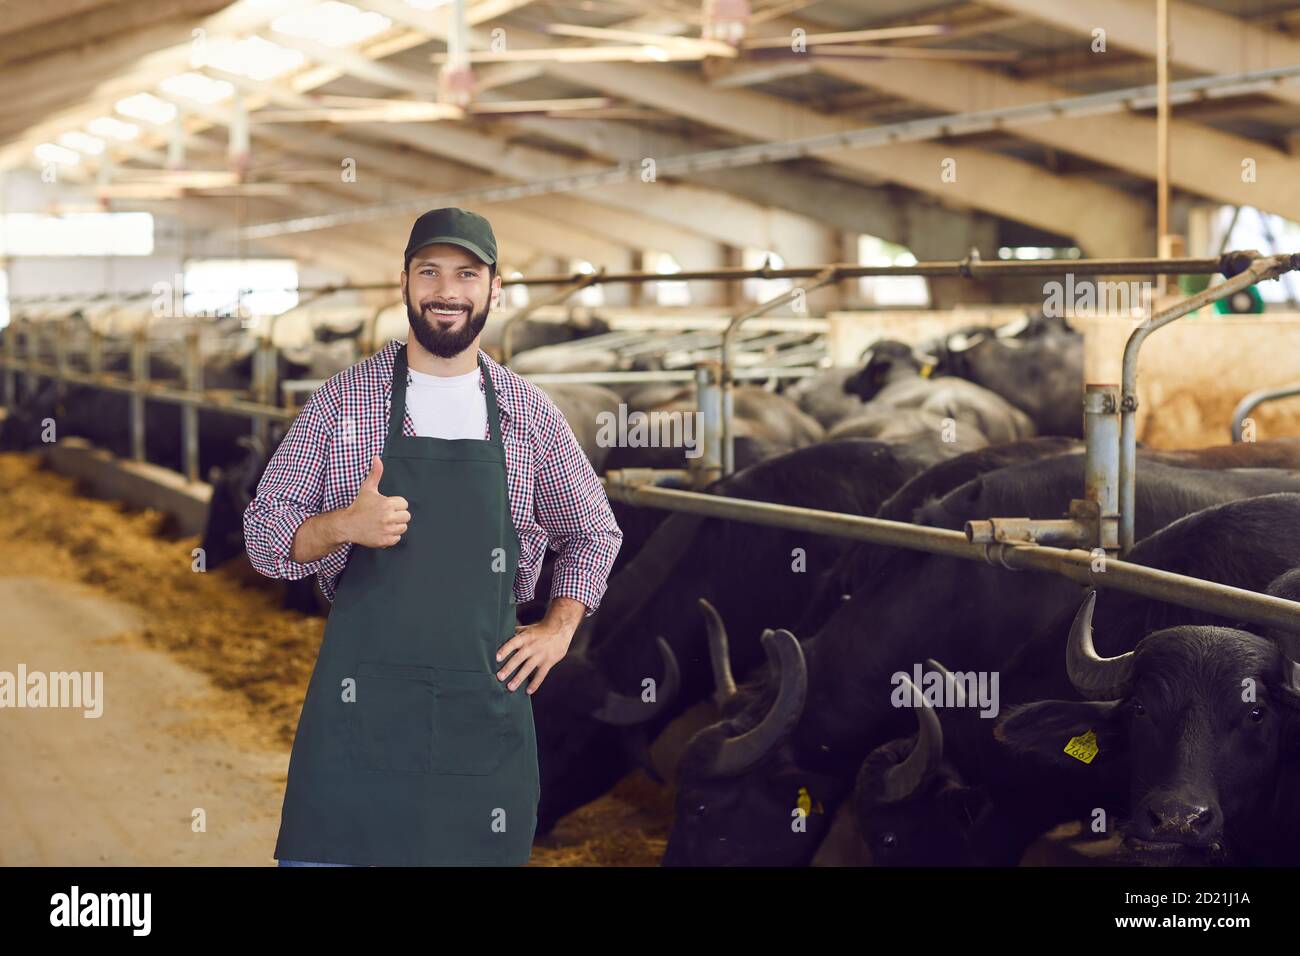 happy-farmer-giving-thumbs-up-standing-in-barn-near-stables-with-black-buffalos-2D21J1A.jpg